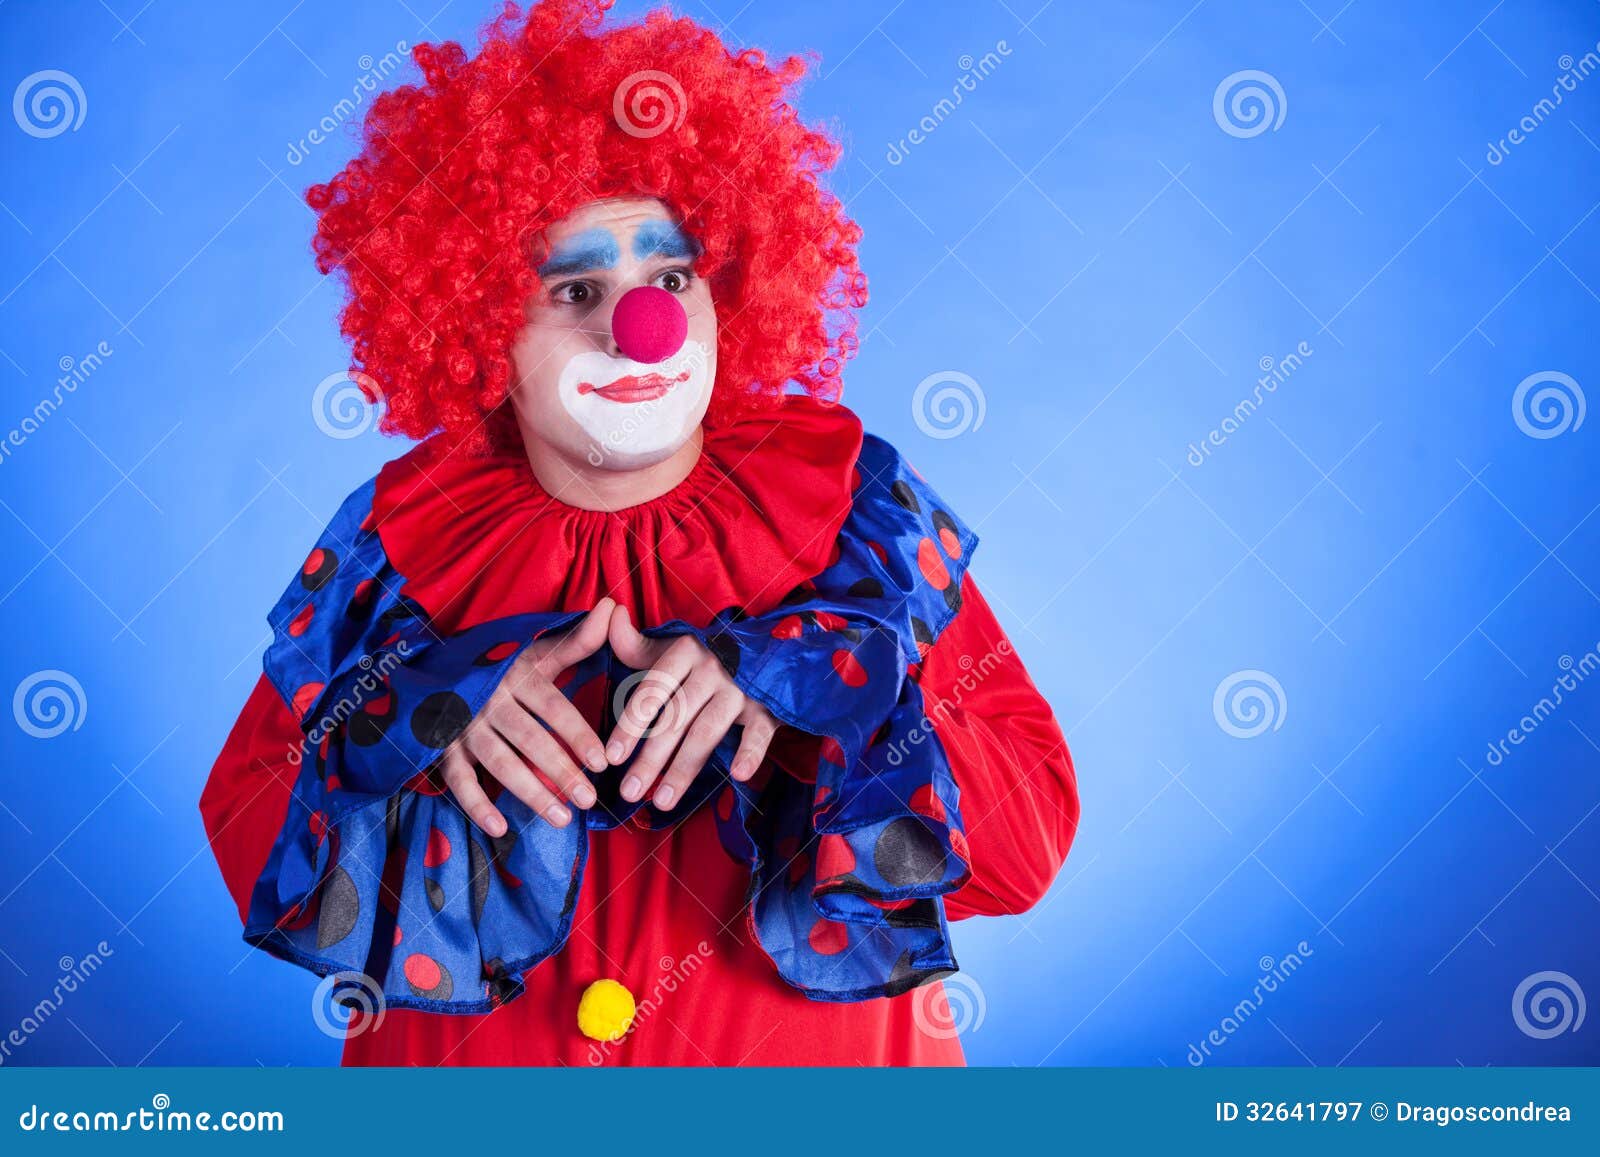 Clown with blue hair and a big smile - wide 2